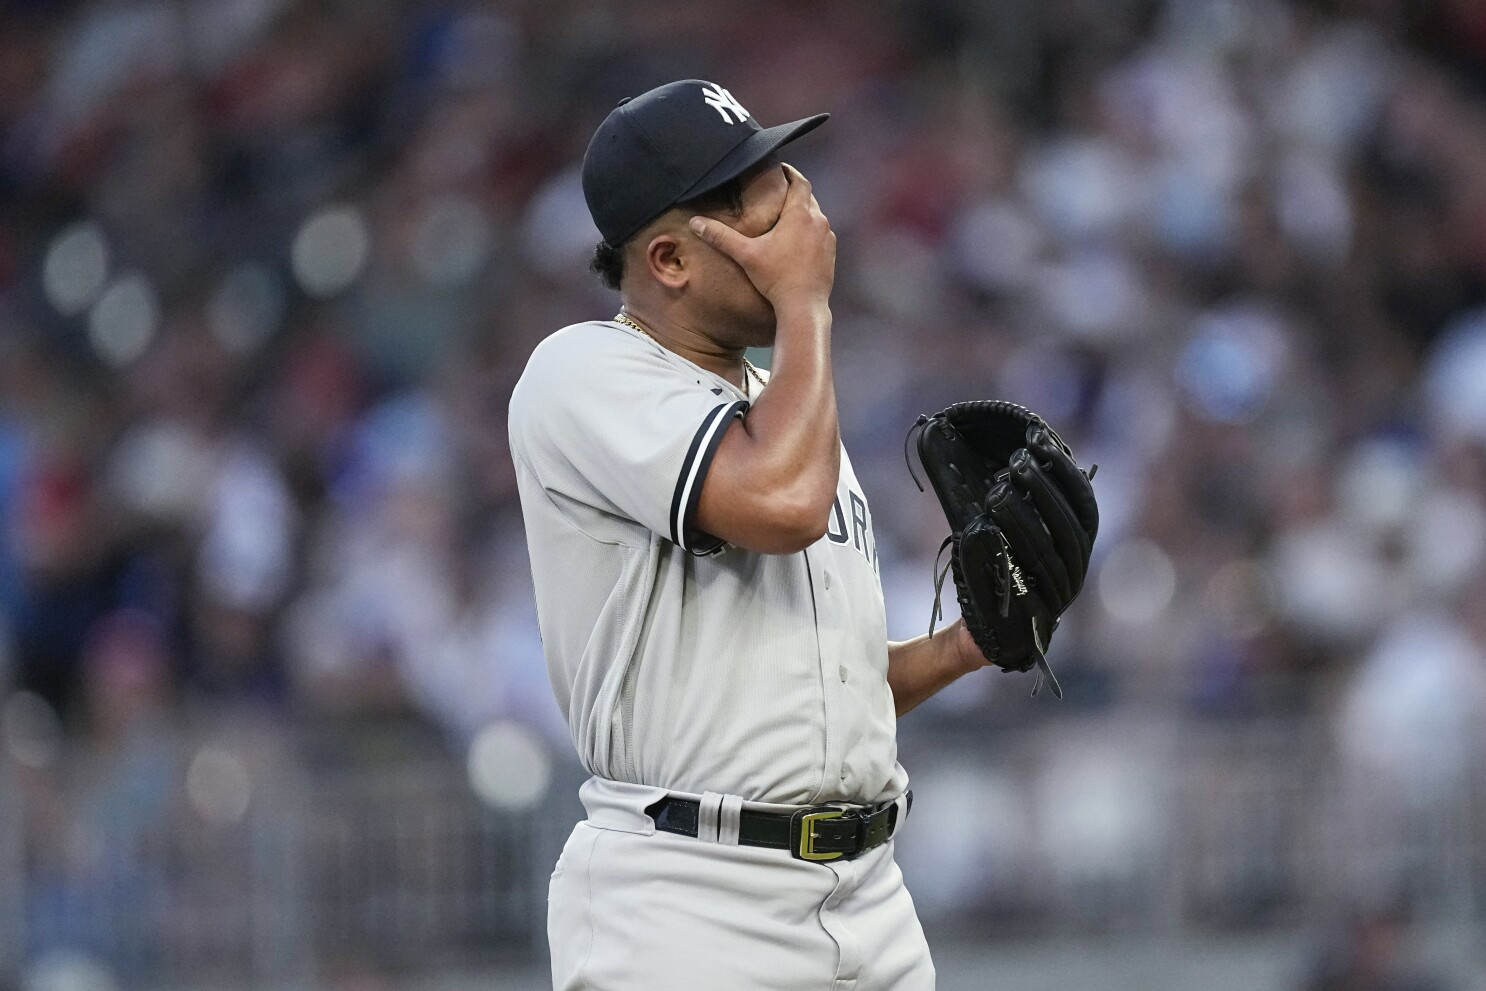 Why Does Everybody Seem To Love This Yankee Pitcher?